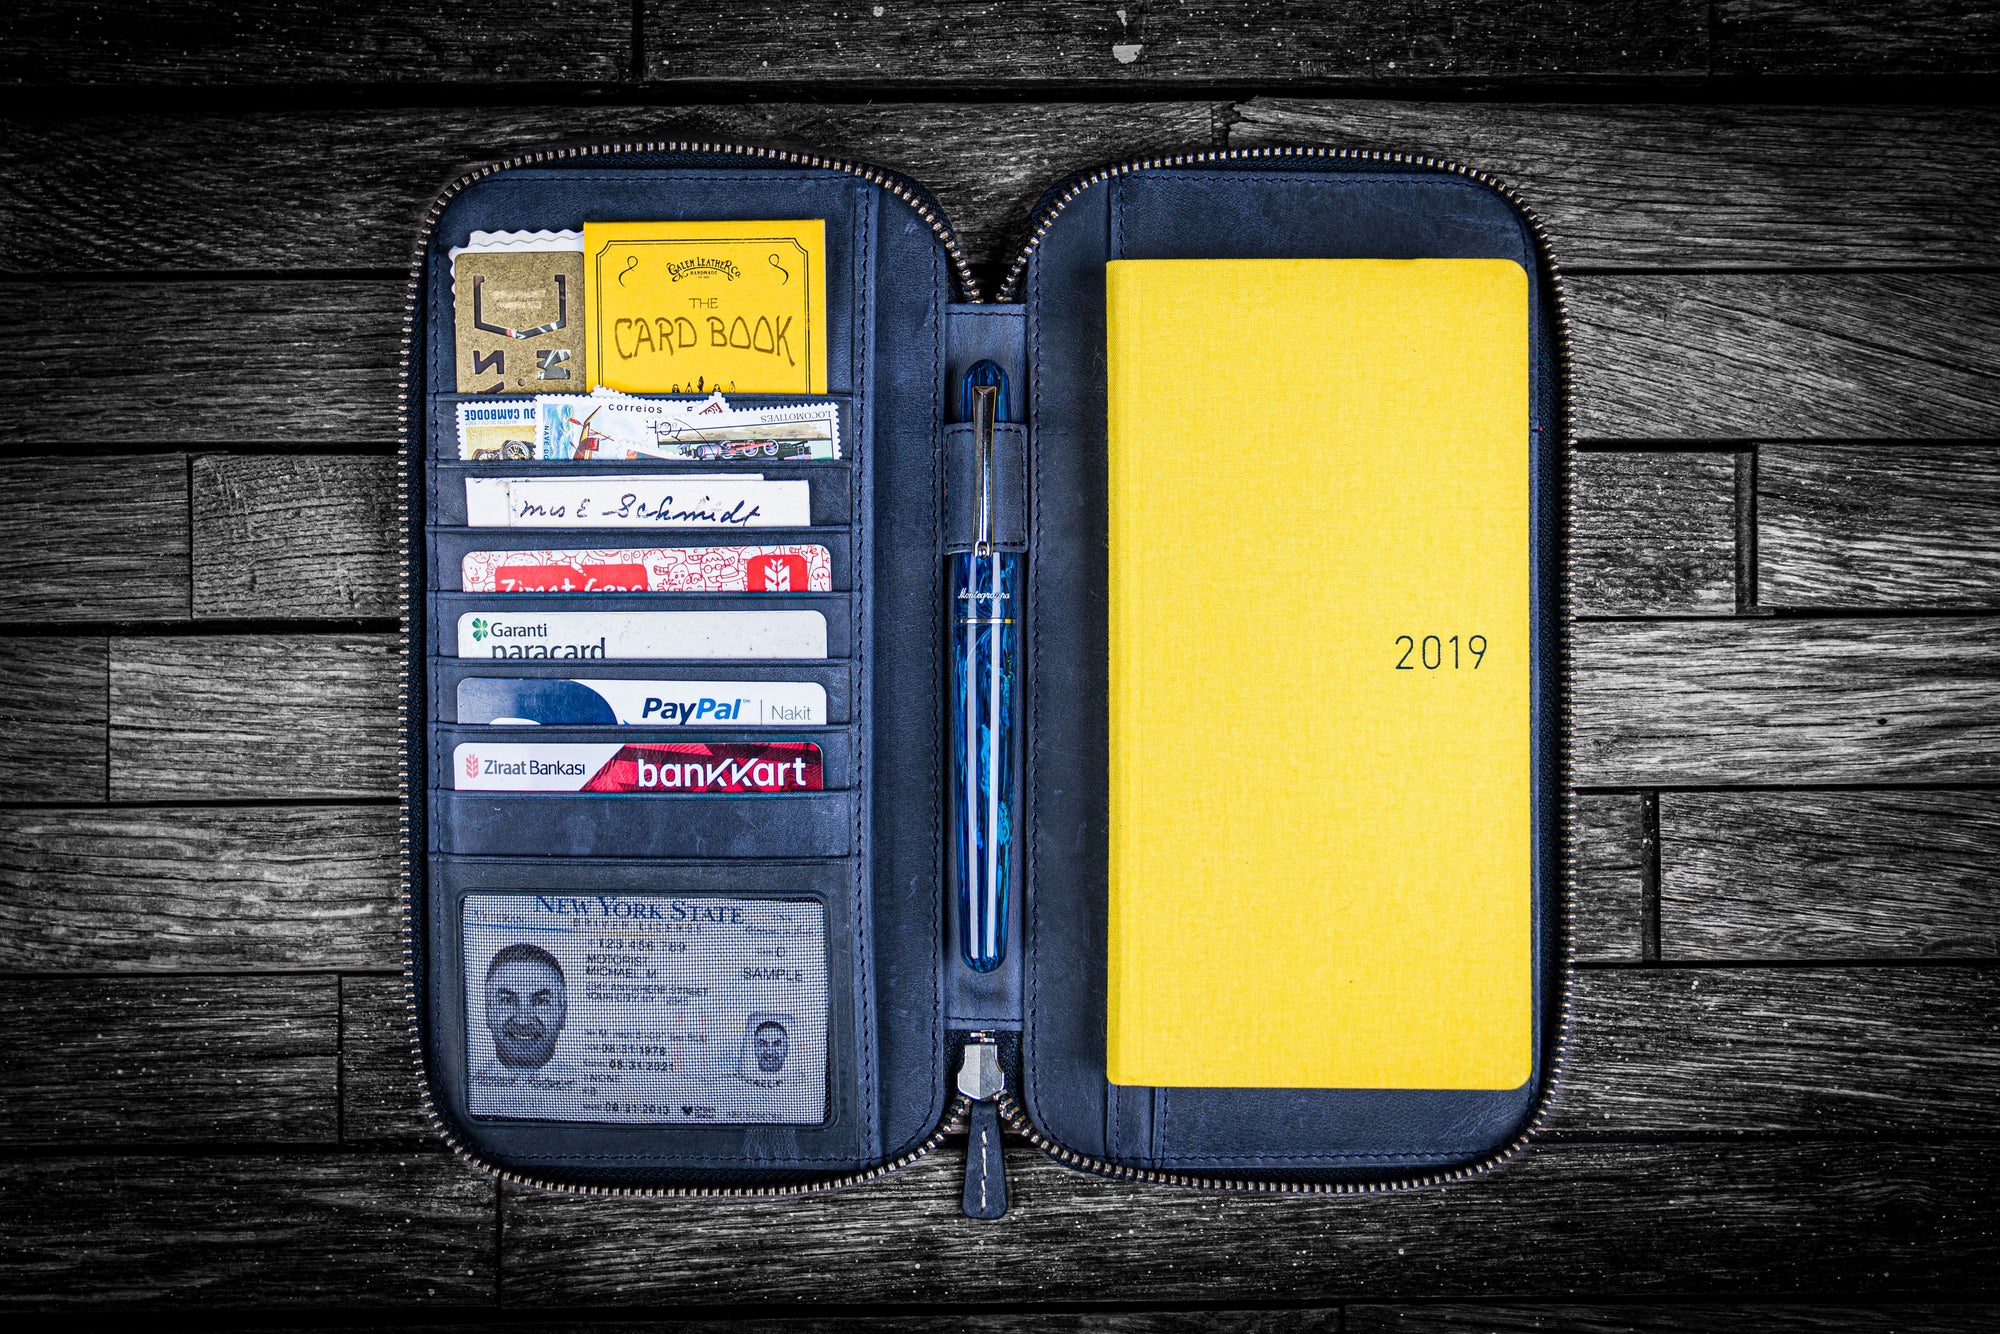 Leather Zippered Hobonichi Weeks Cover - Crazy Horse Navy Blue